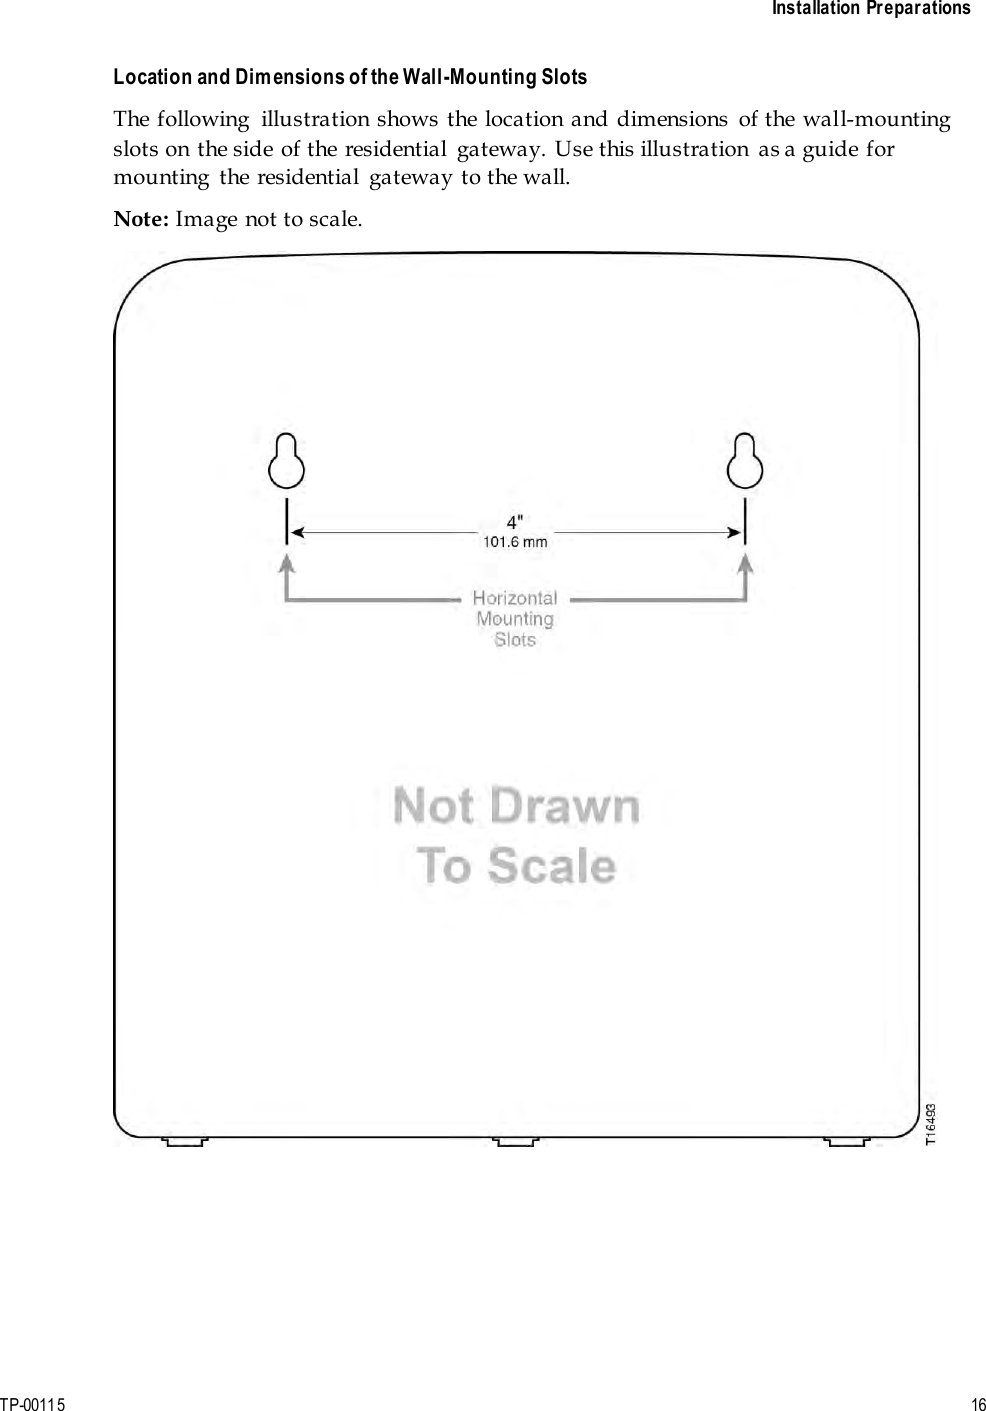 Installation Preparations TP-00115  16 Location and Dimensions of the Wall-Mounting Slots The following  illustration shows  the location  and dimensions  of the wall-mounting slots on the side of the residential  gateway. Use this illustration  as a guide for mounting  the residential  gateway to the wall. Note: Image not to scale. 